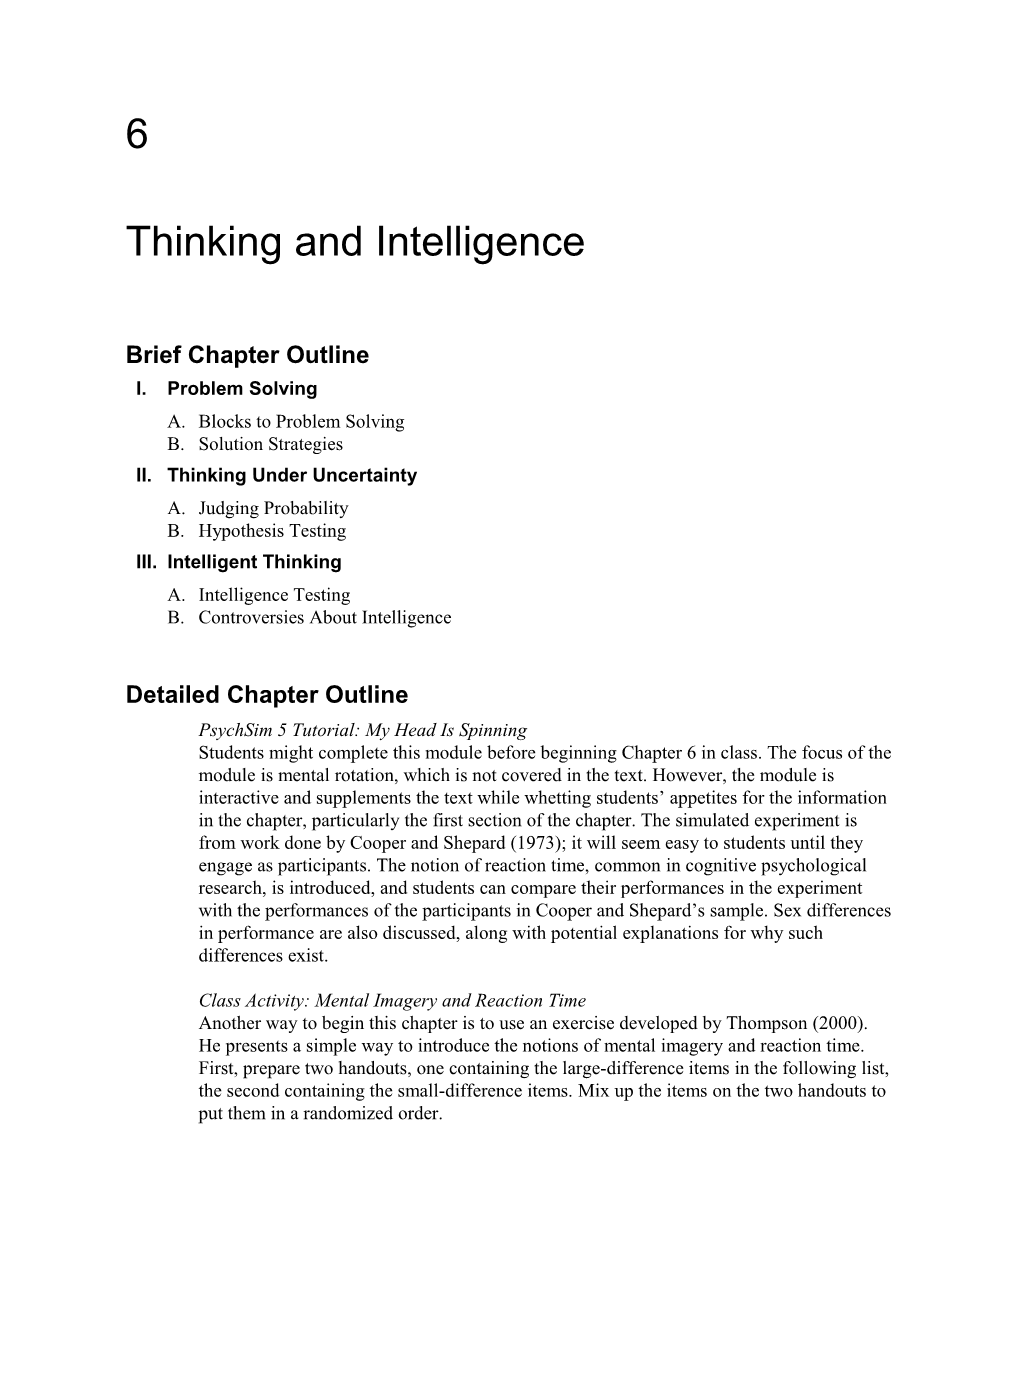 Brief Chapter Outline